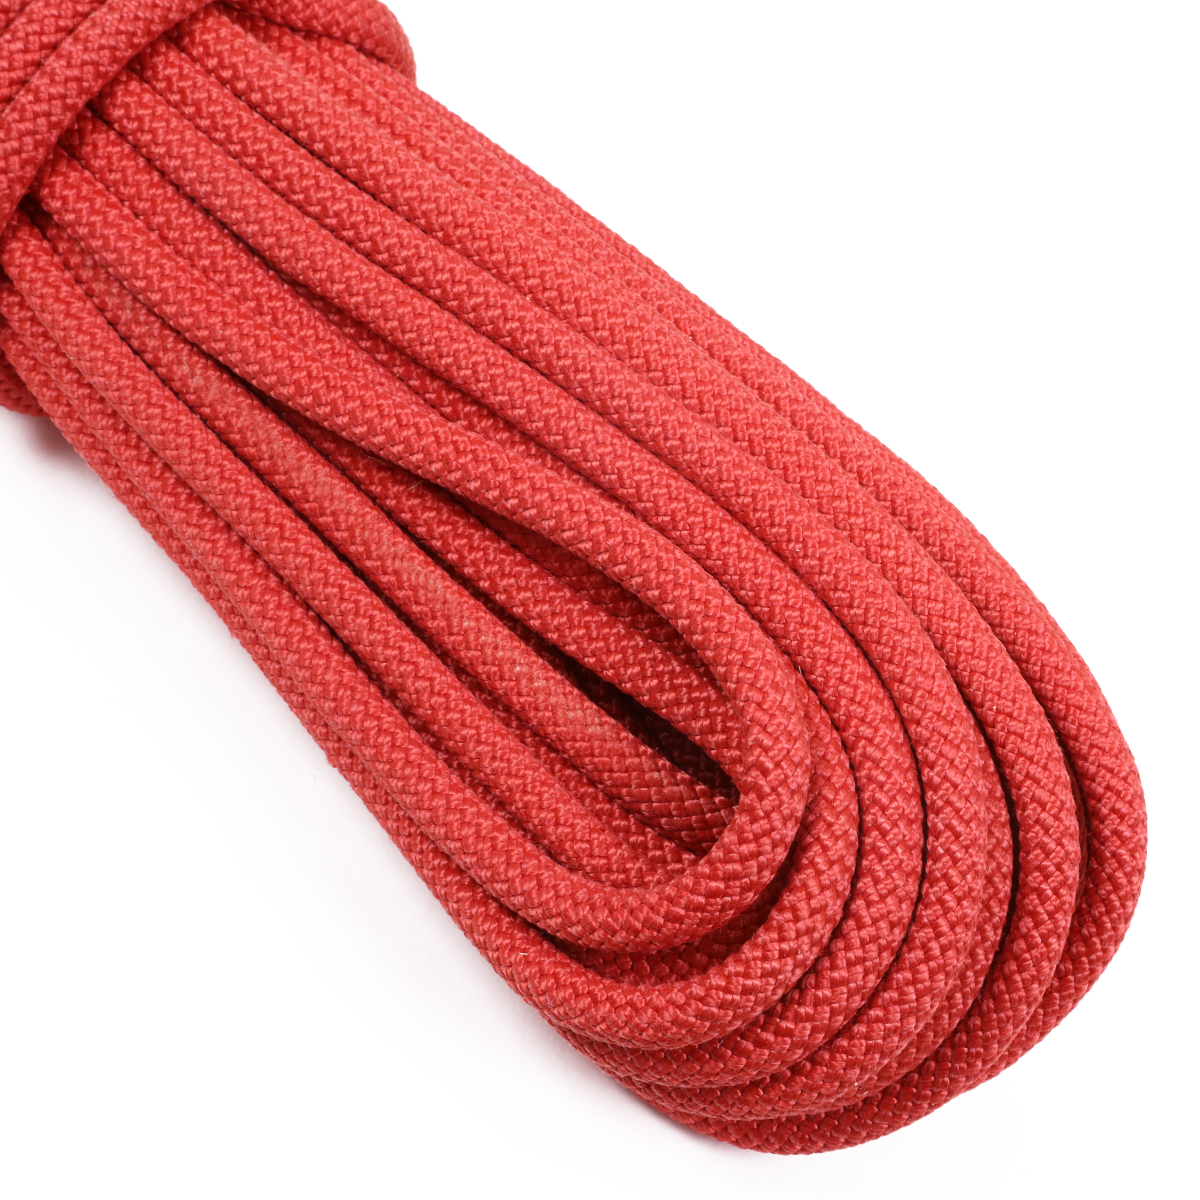 ASR Outdoor Kevlar Utility Cord 200lb Hobby Sport Paracord Line, 25ft Red 